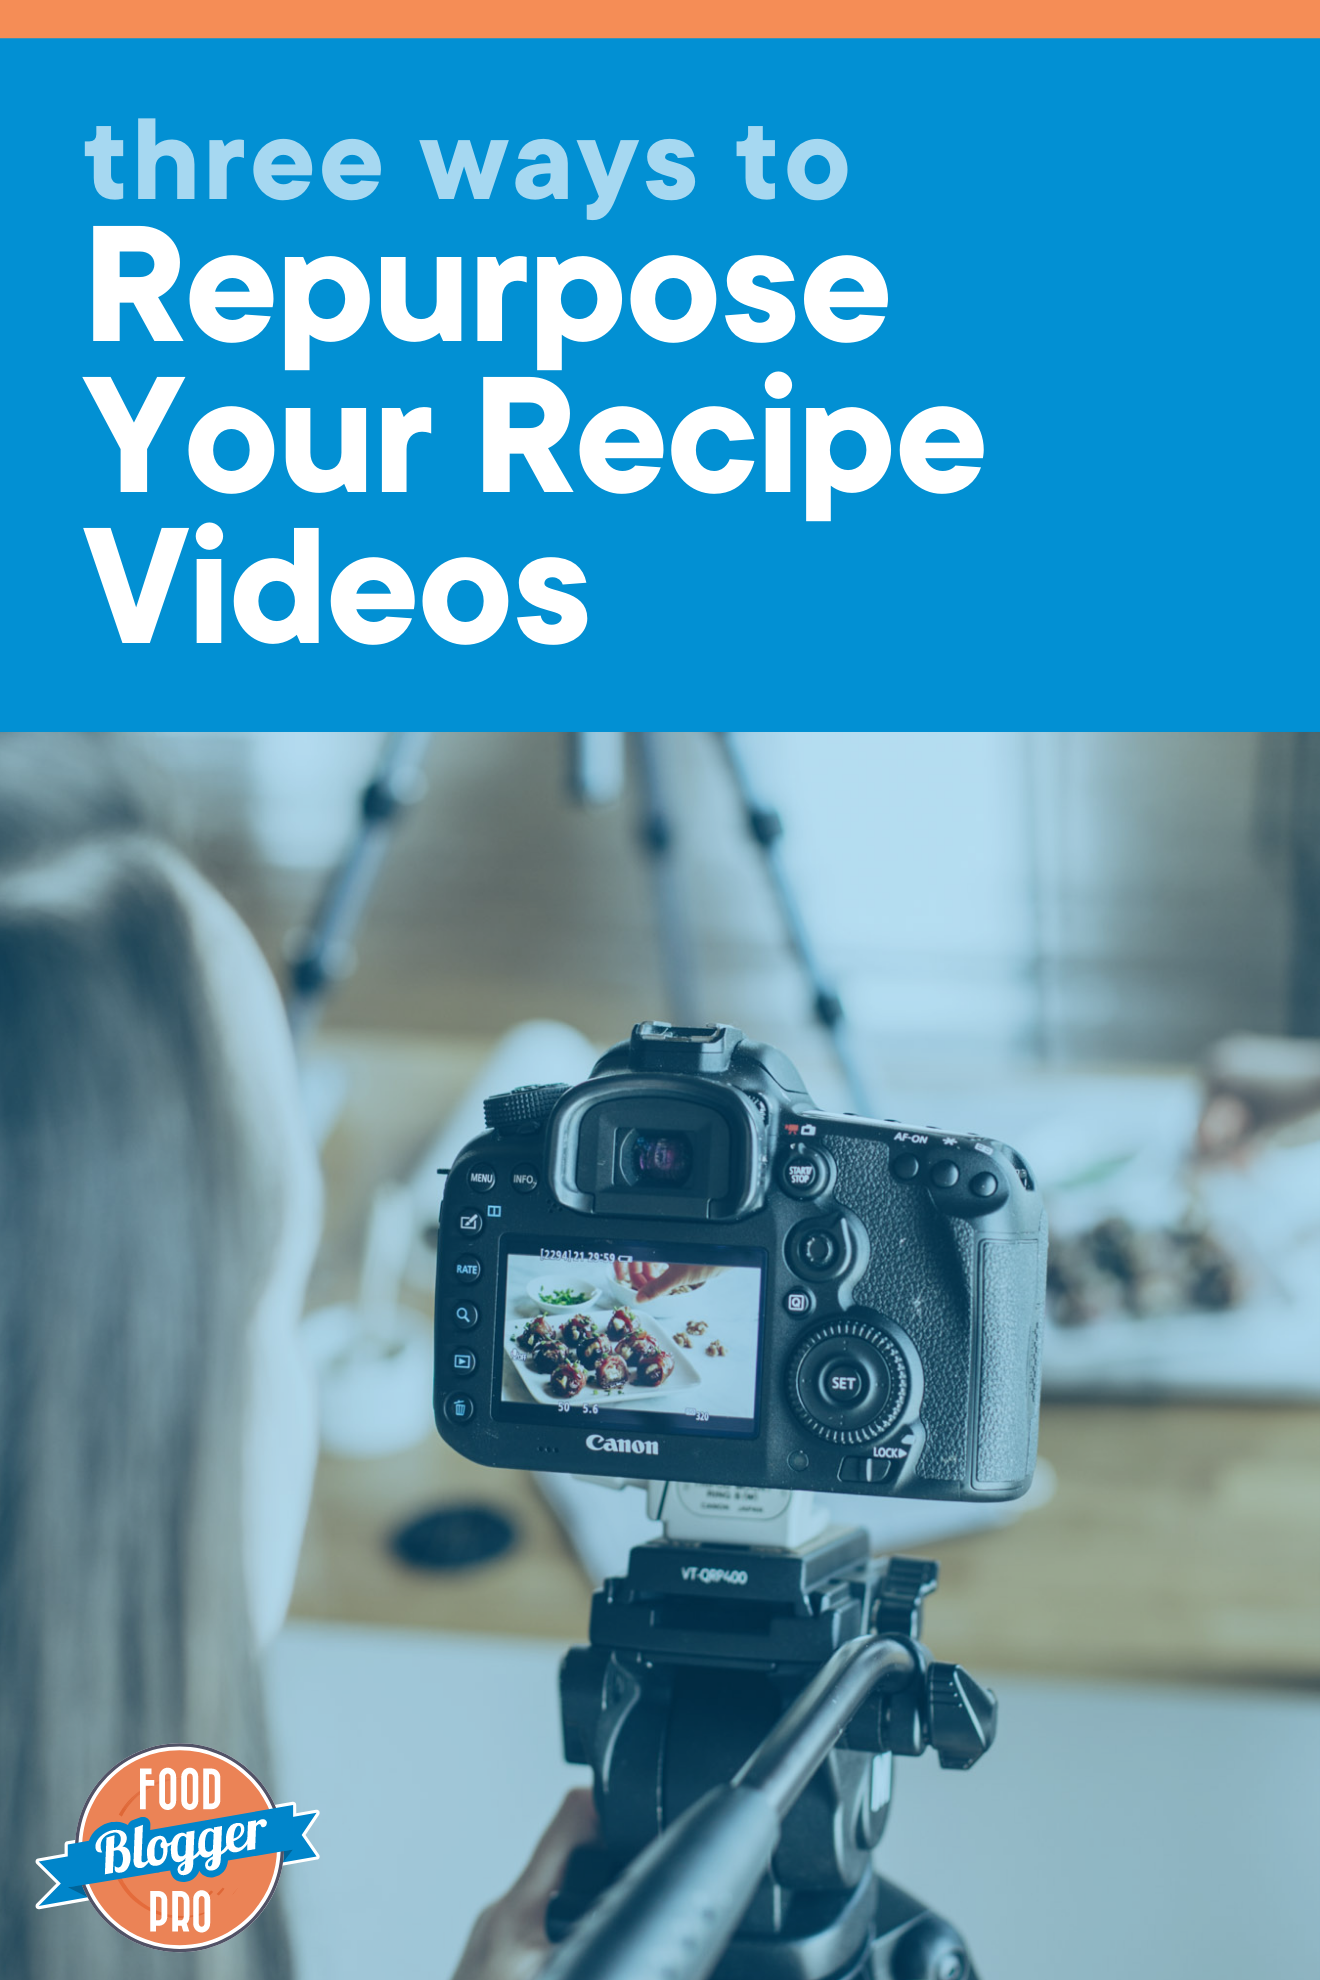 a photo of someone shooting a recipe video with the title of this article 'Three Ways to Repurpose Your Recipe Videos'